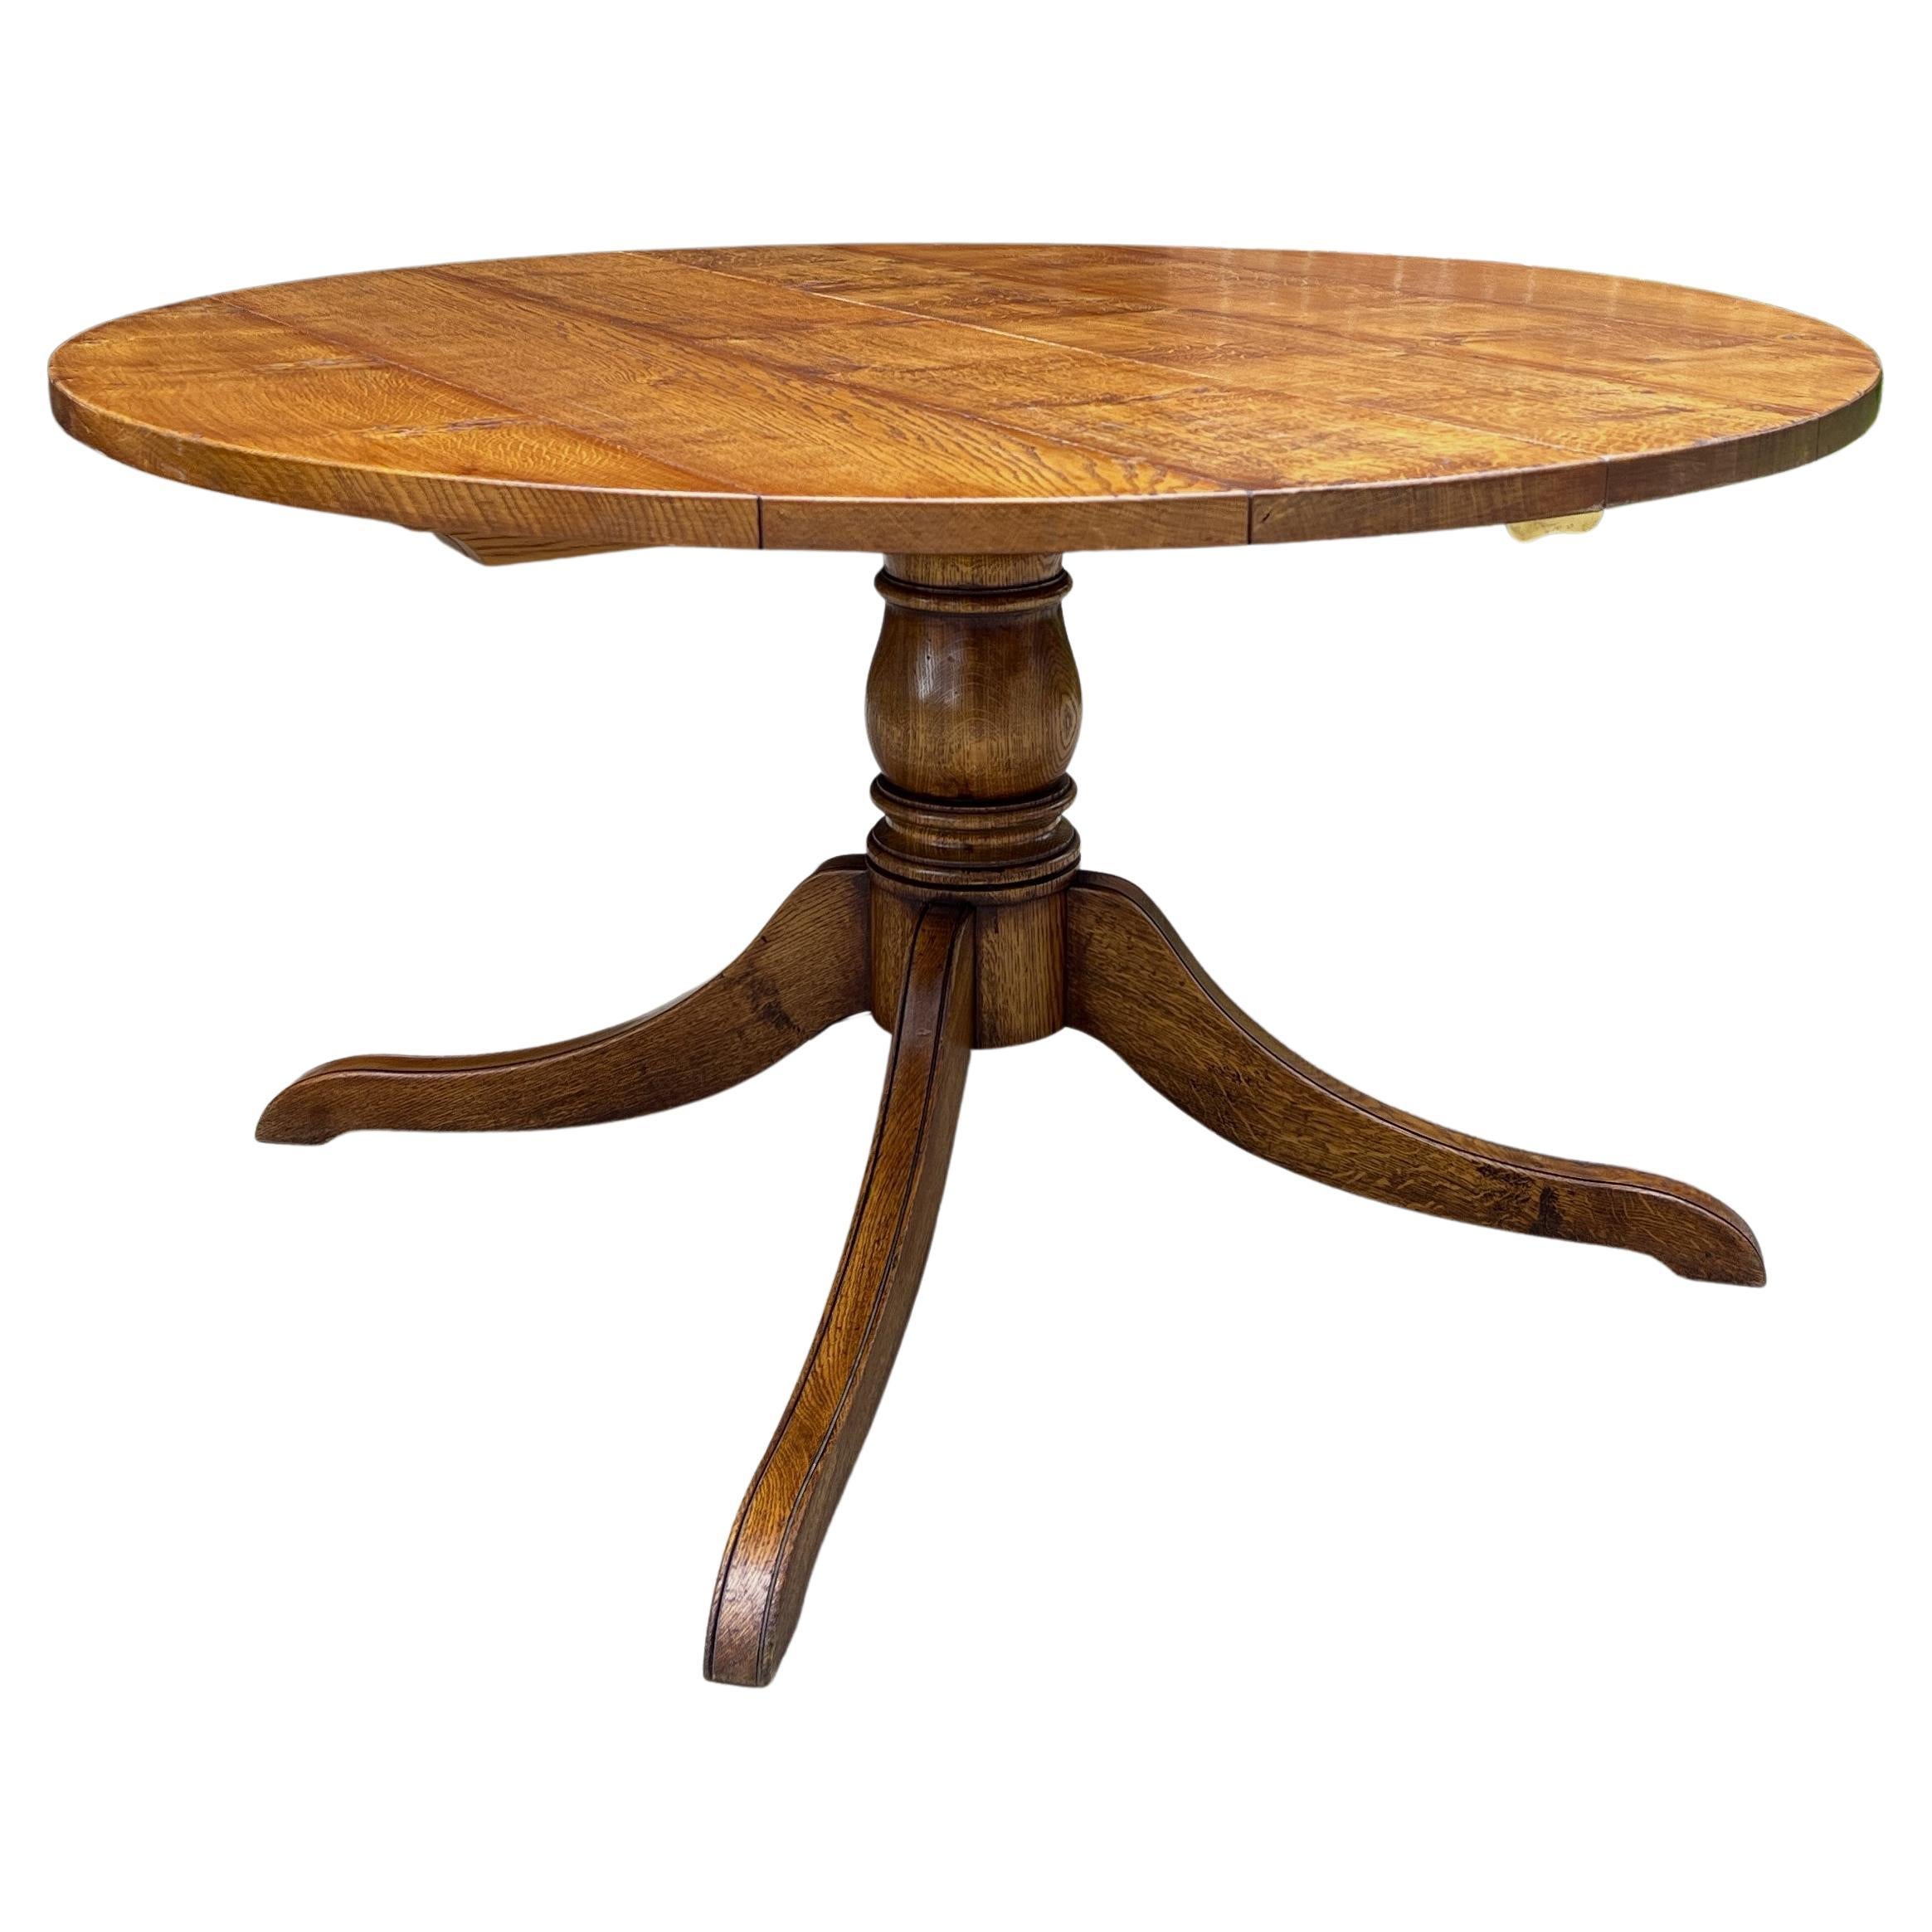 Midcentury English Round/Oval Dining Table Pedestal Base with Leaf Oak, c. 1940s